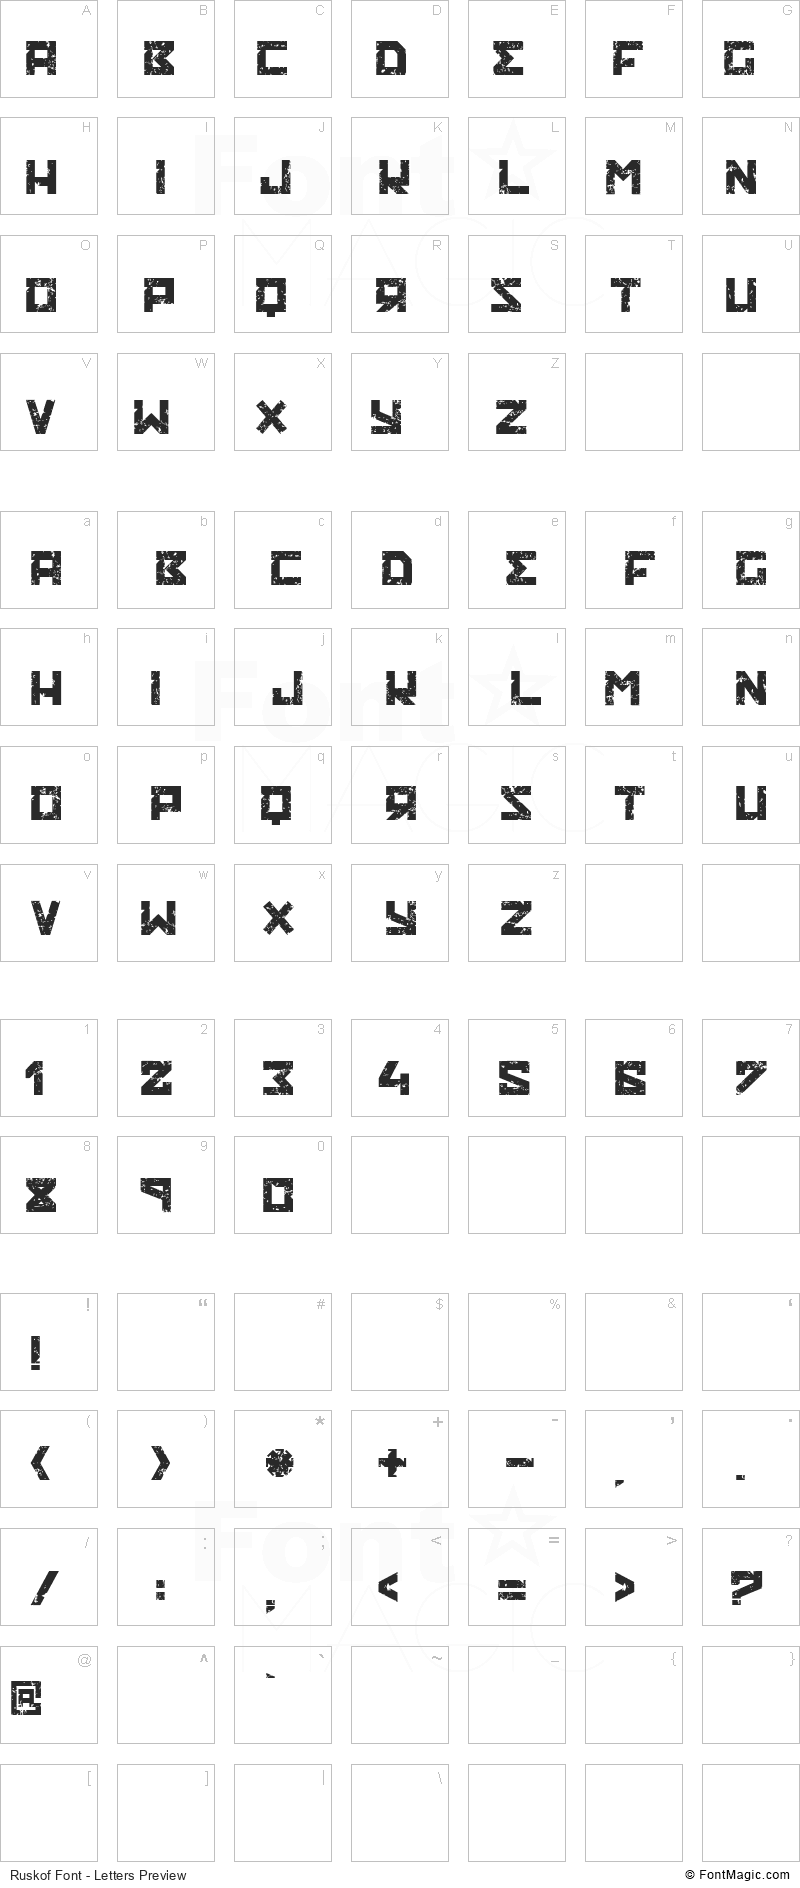 Ruskof Font - All Latters Preview Chart